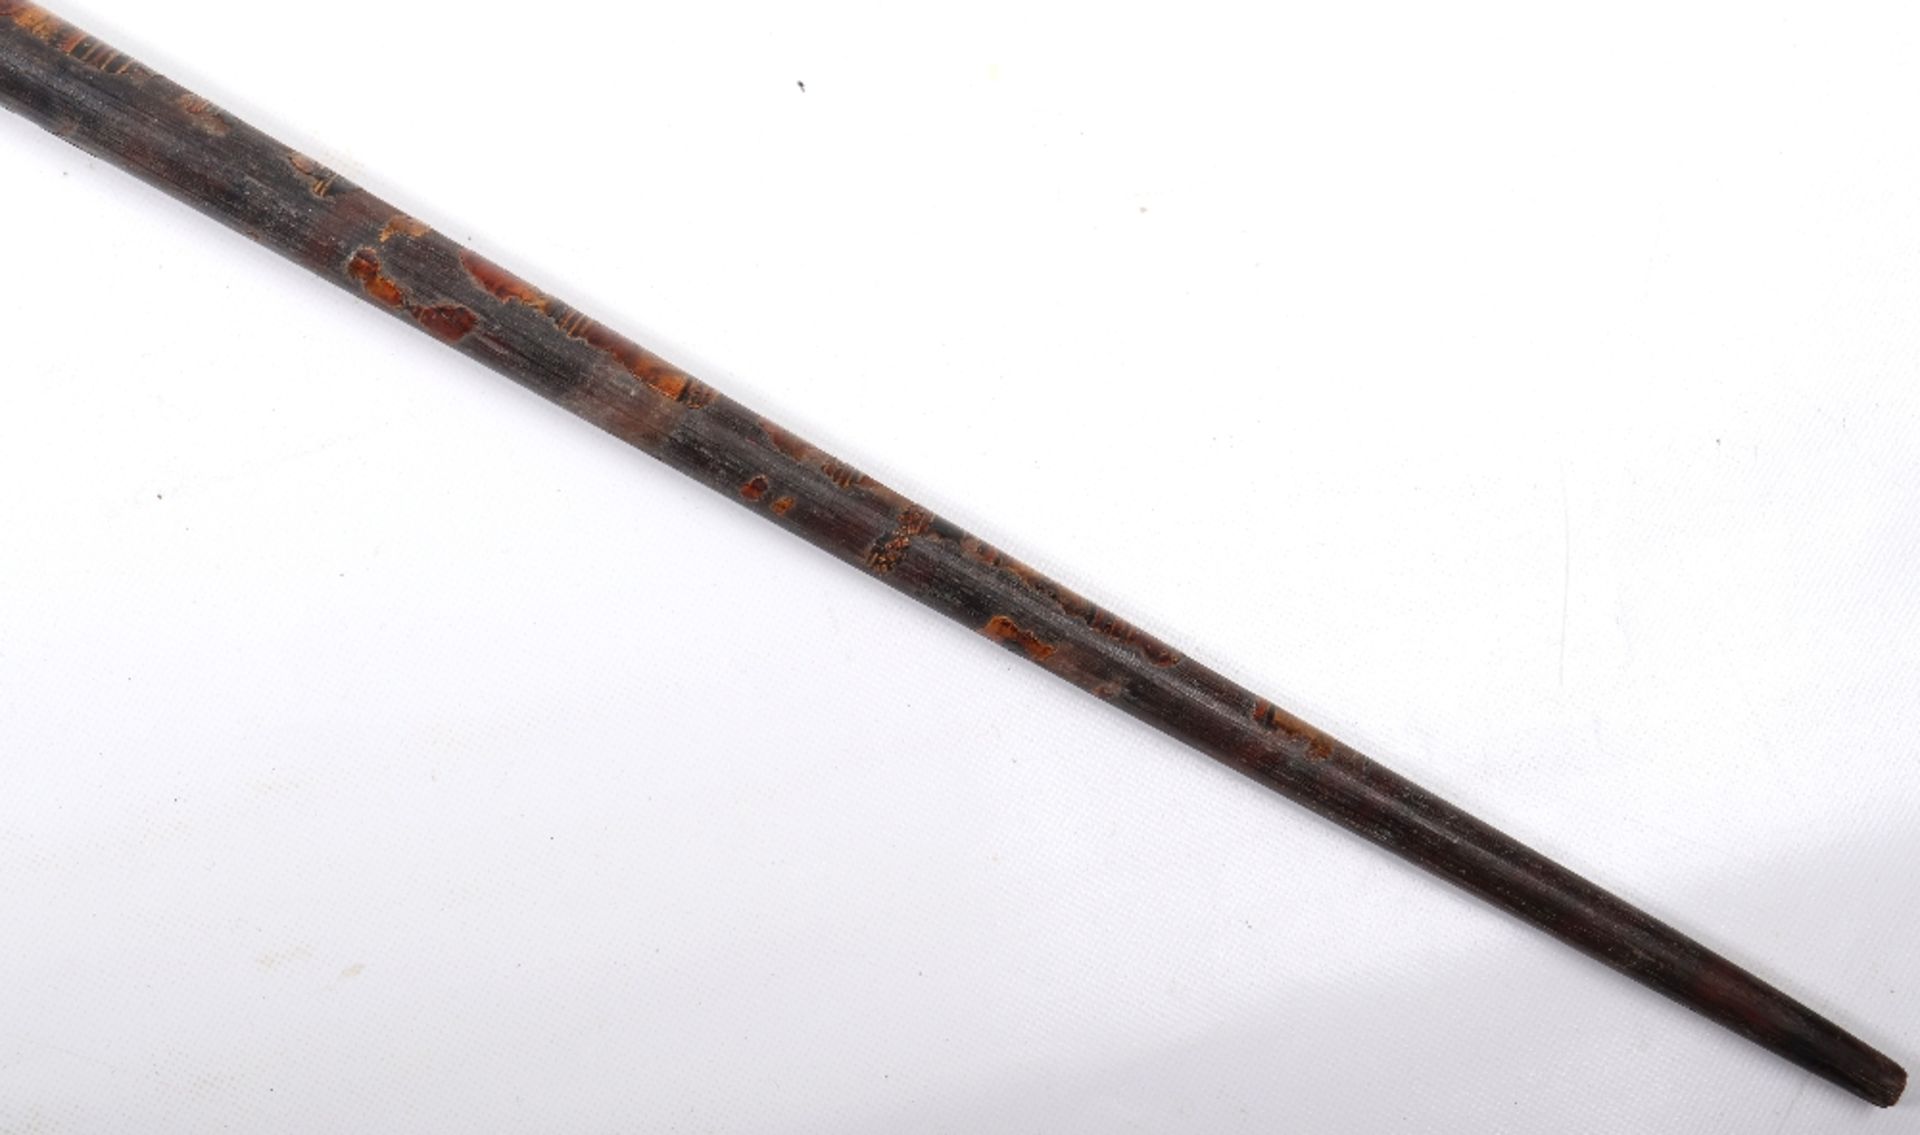 Ceylonese Spear Patisthanaya, Probably 18th or 19th Century - Image 5 of 9